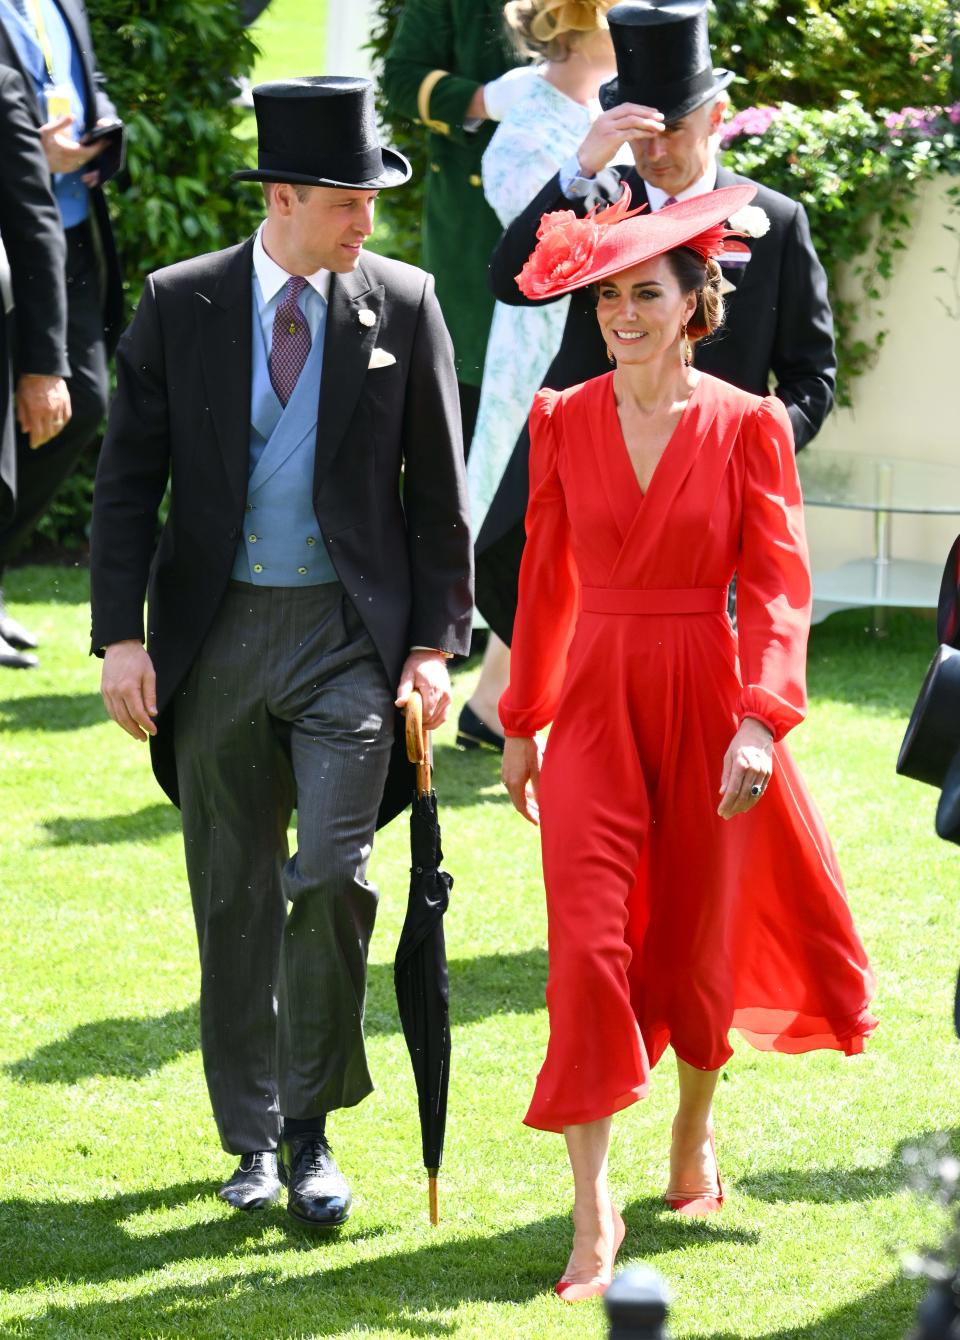 Kate Middleton wears a bight-red dress during Royal Ascot 2023, with Prince William at her side.